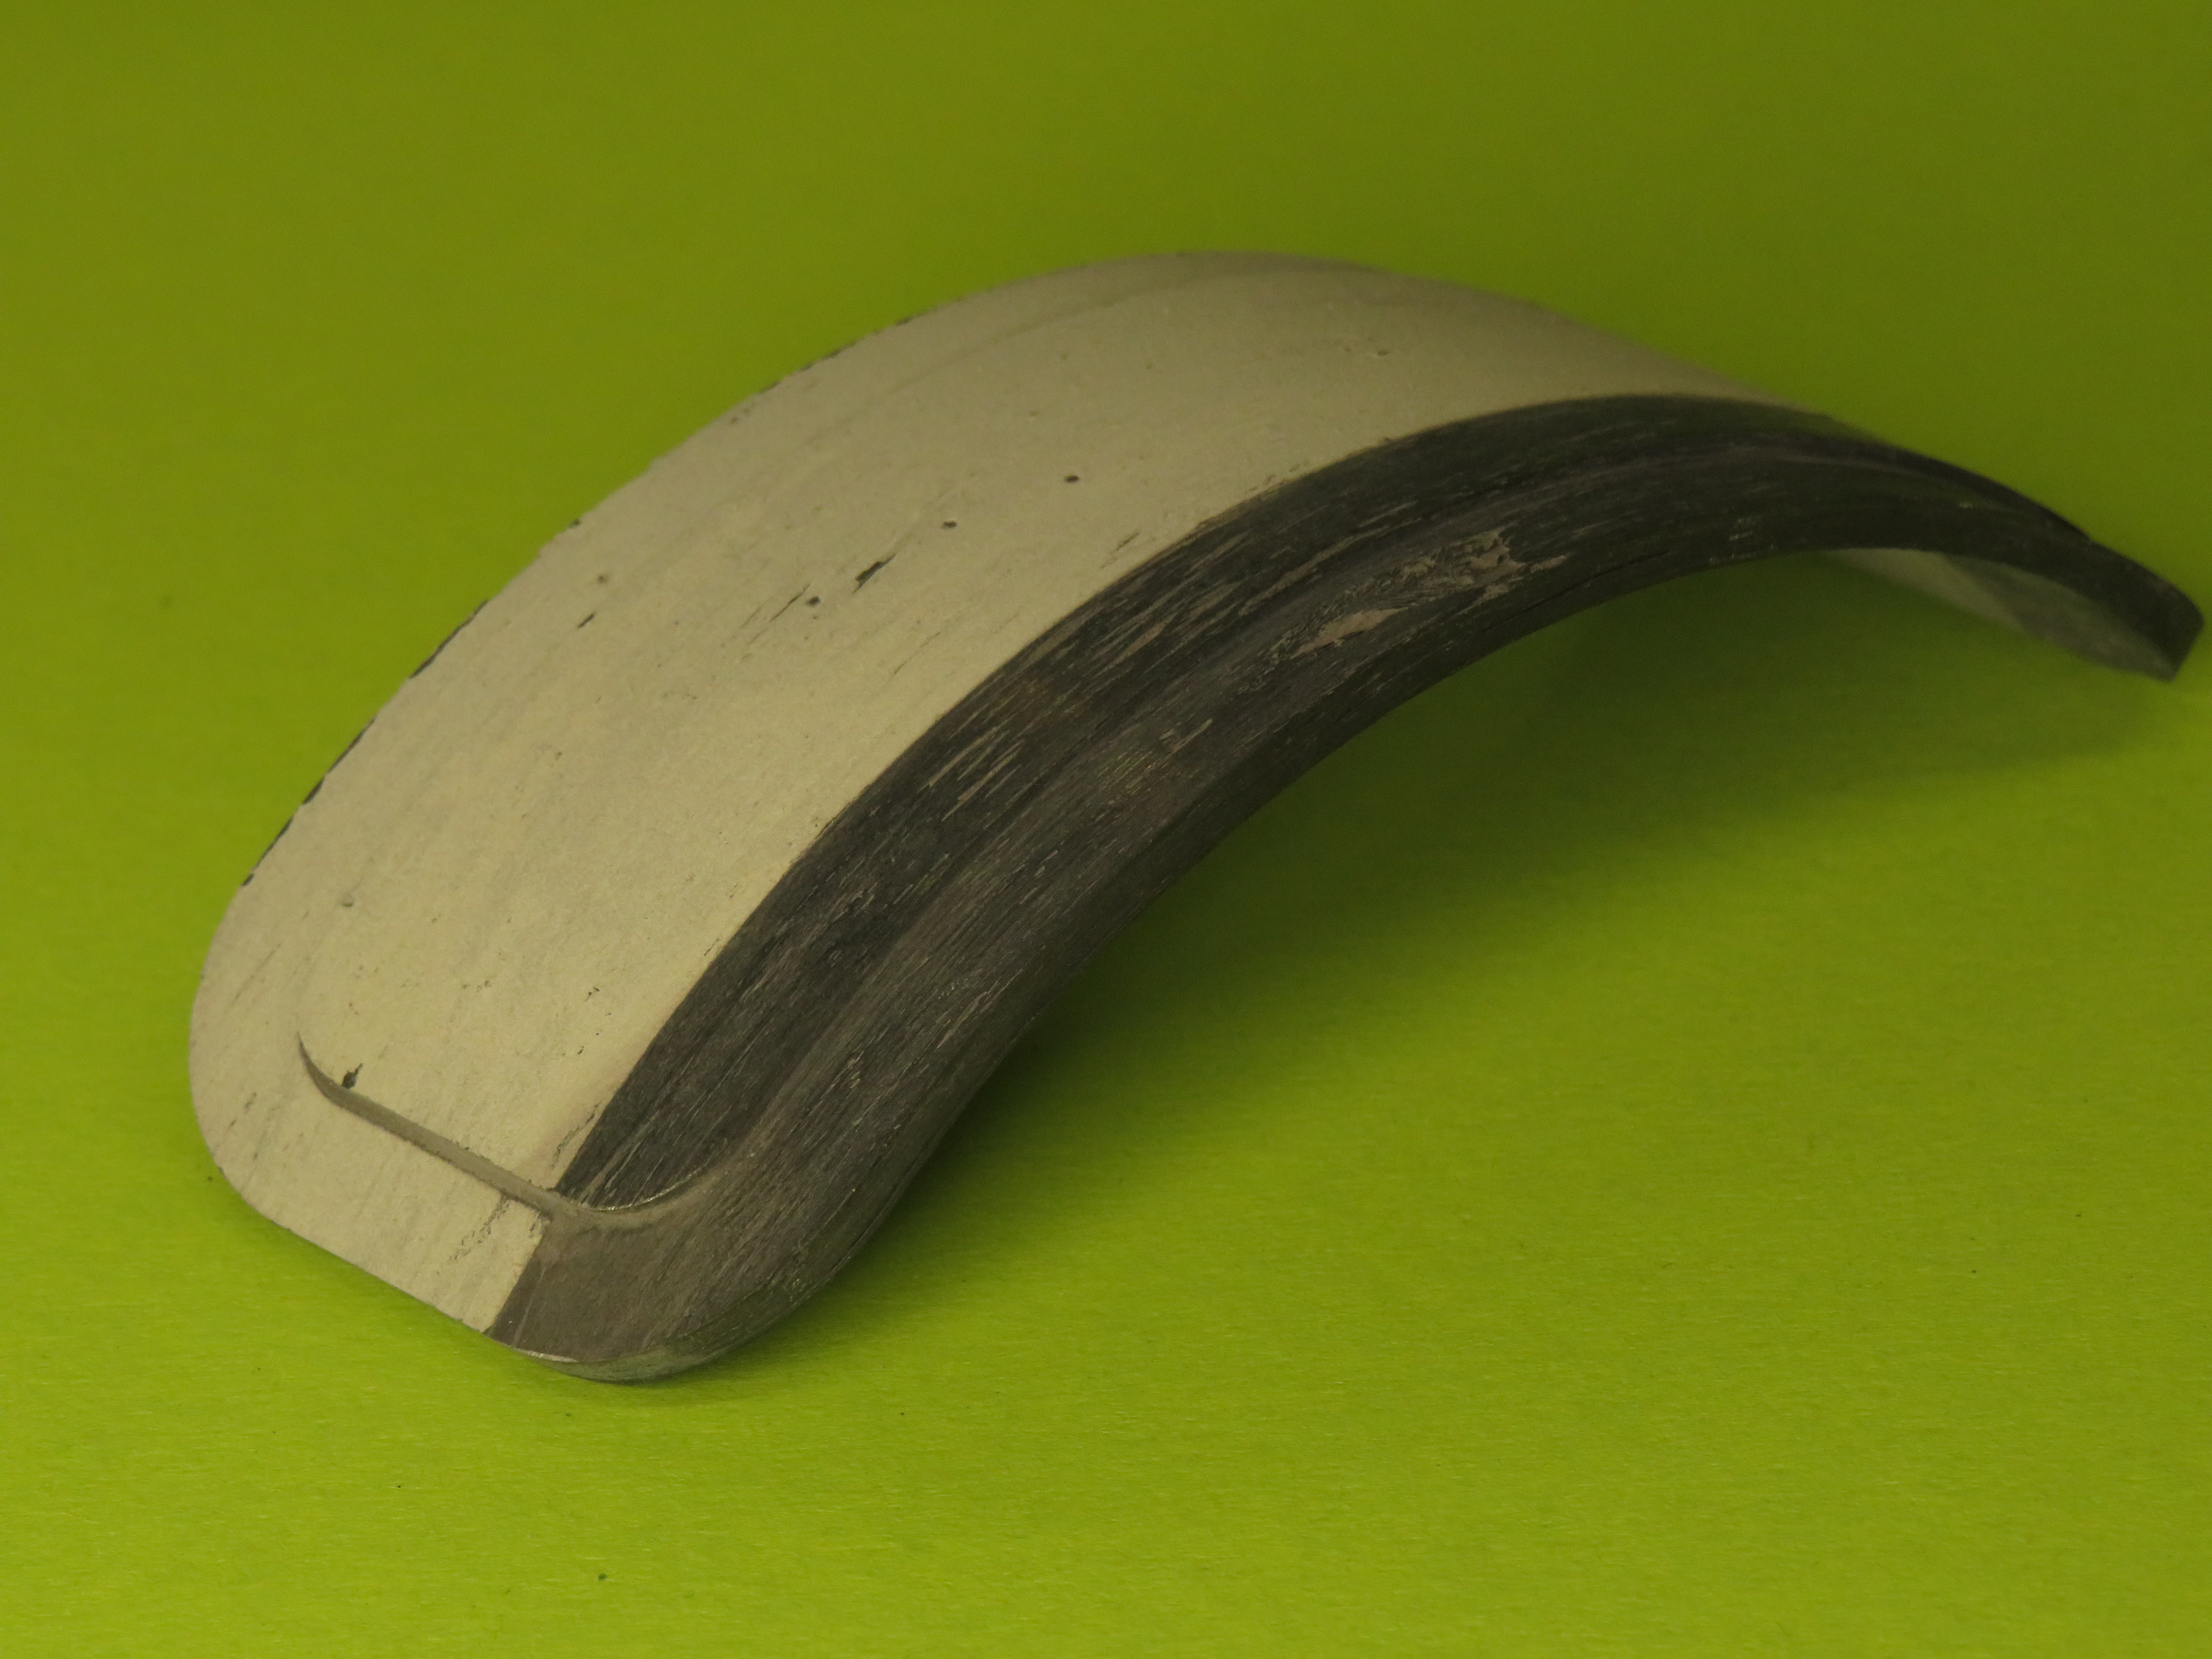 SiC/SiC component as curved tile with EBC coating.